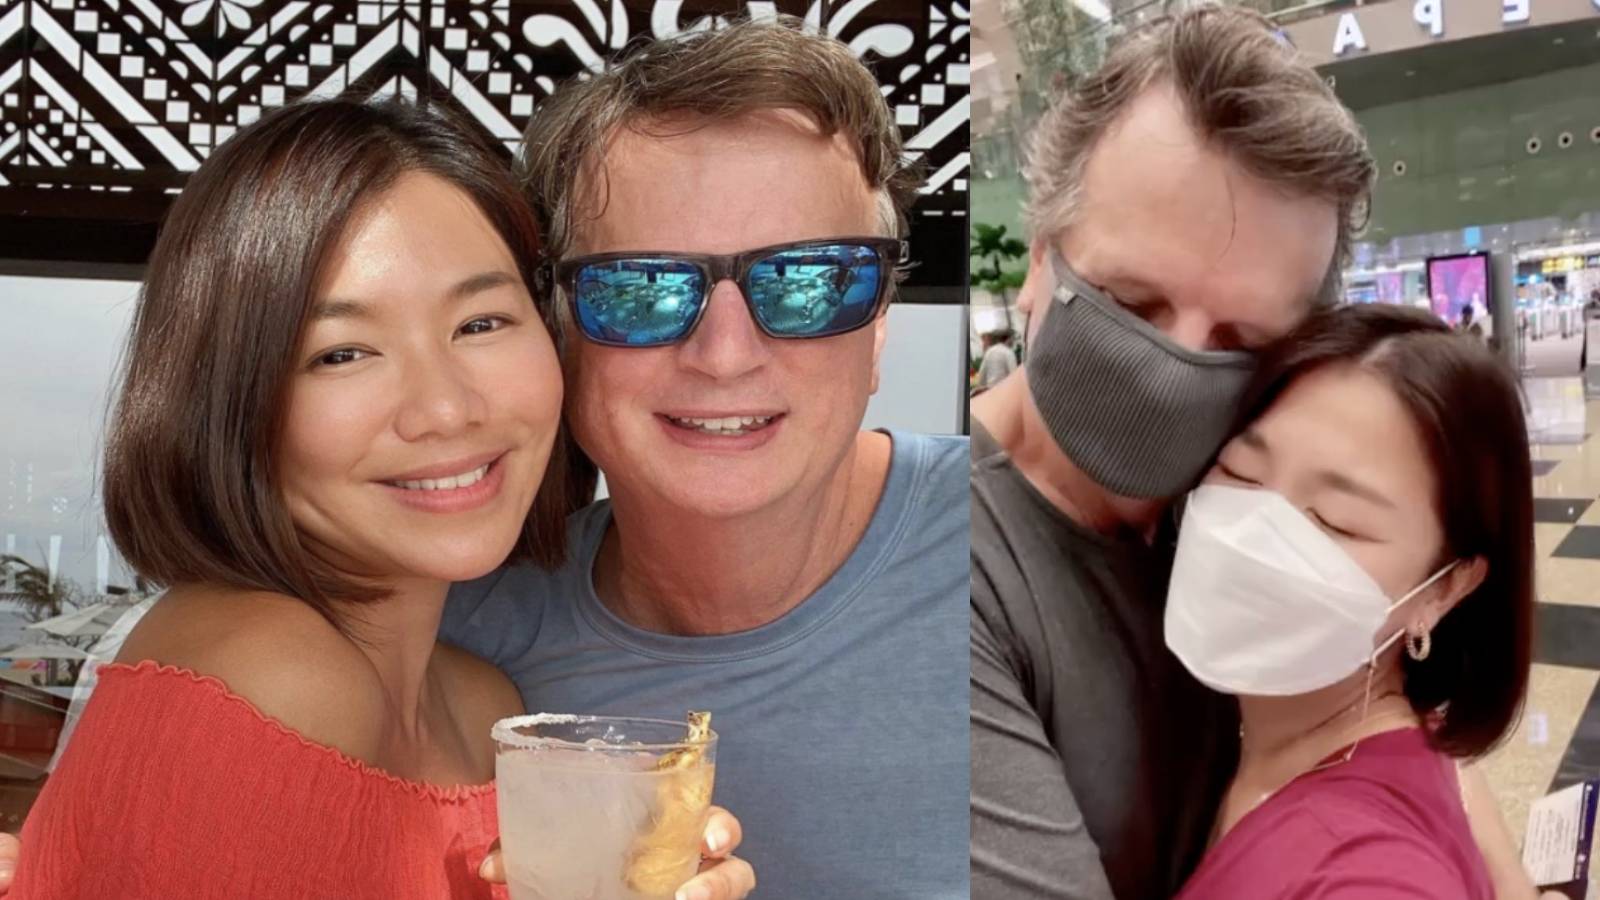 Belinda Lee Says She Hopes Her Husband Would “Miss Her” In Sweet Airport Video Filmed On Valentine’s Day